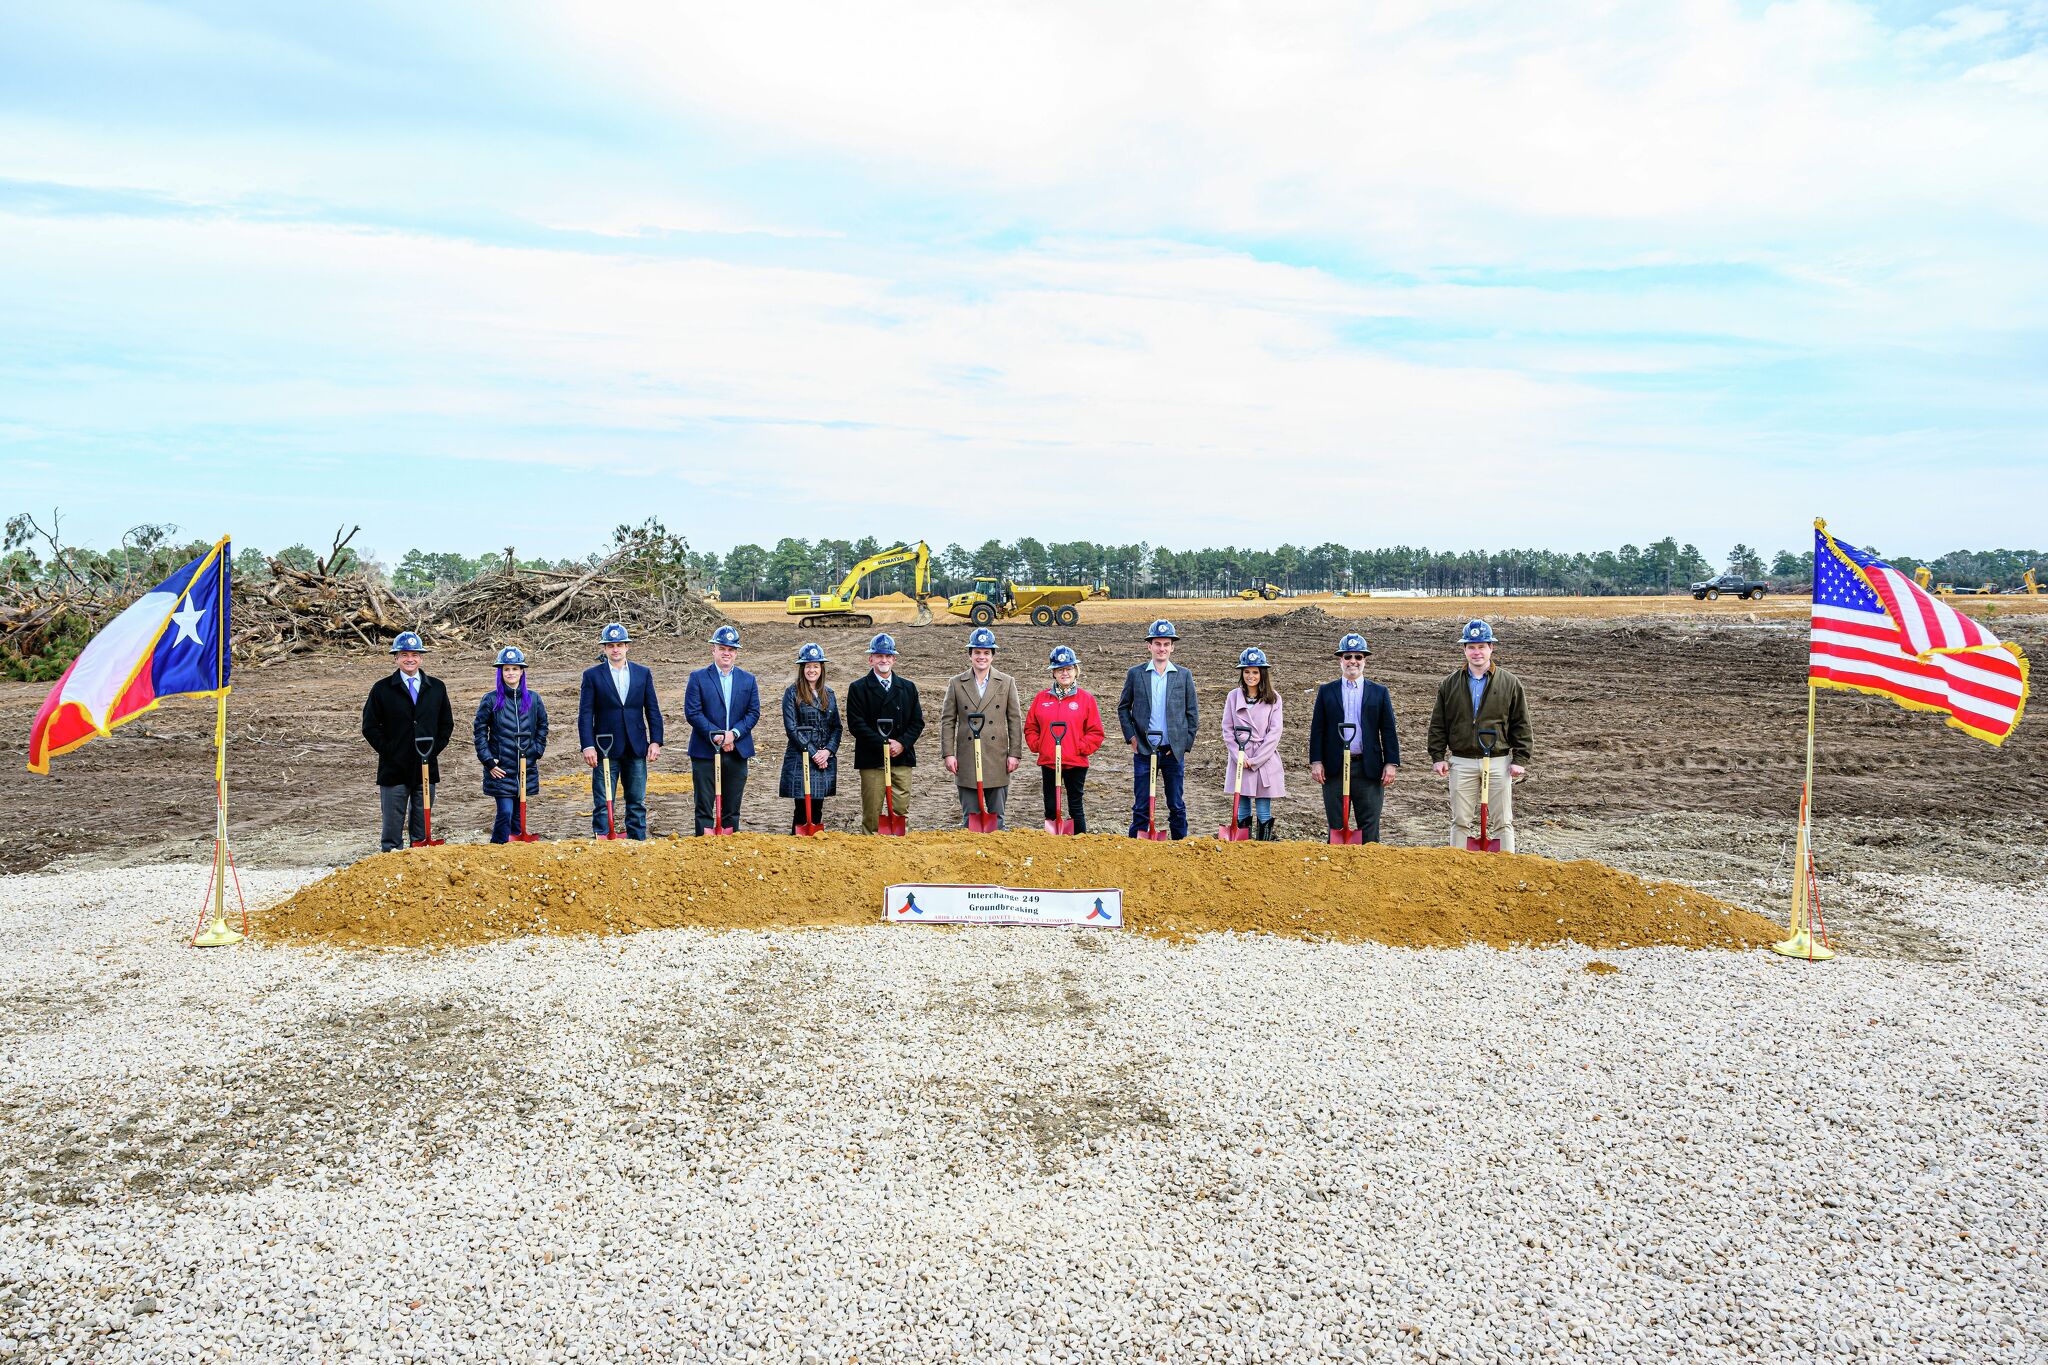 240-acre business park anchored by Macy’s distribution hub breaks ground